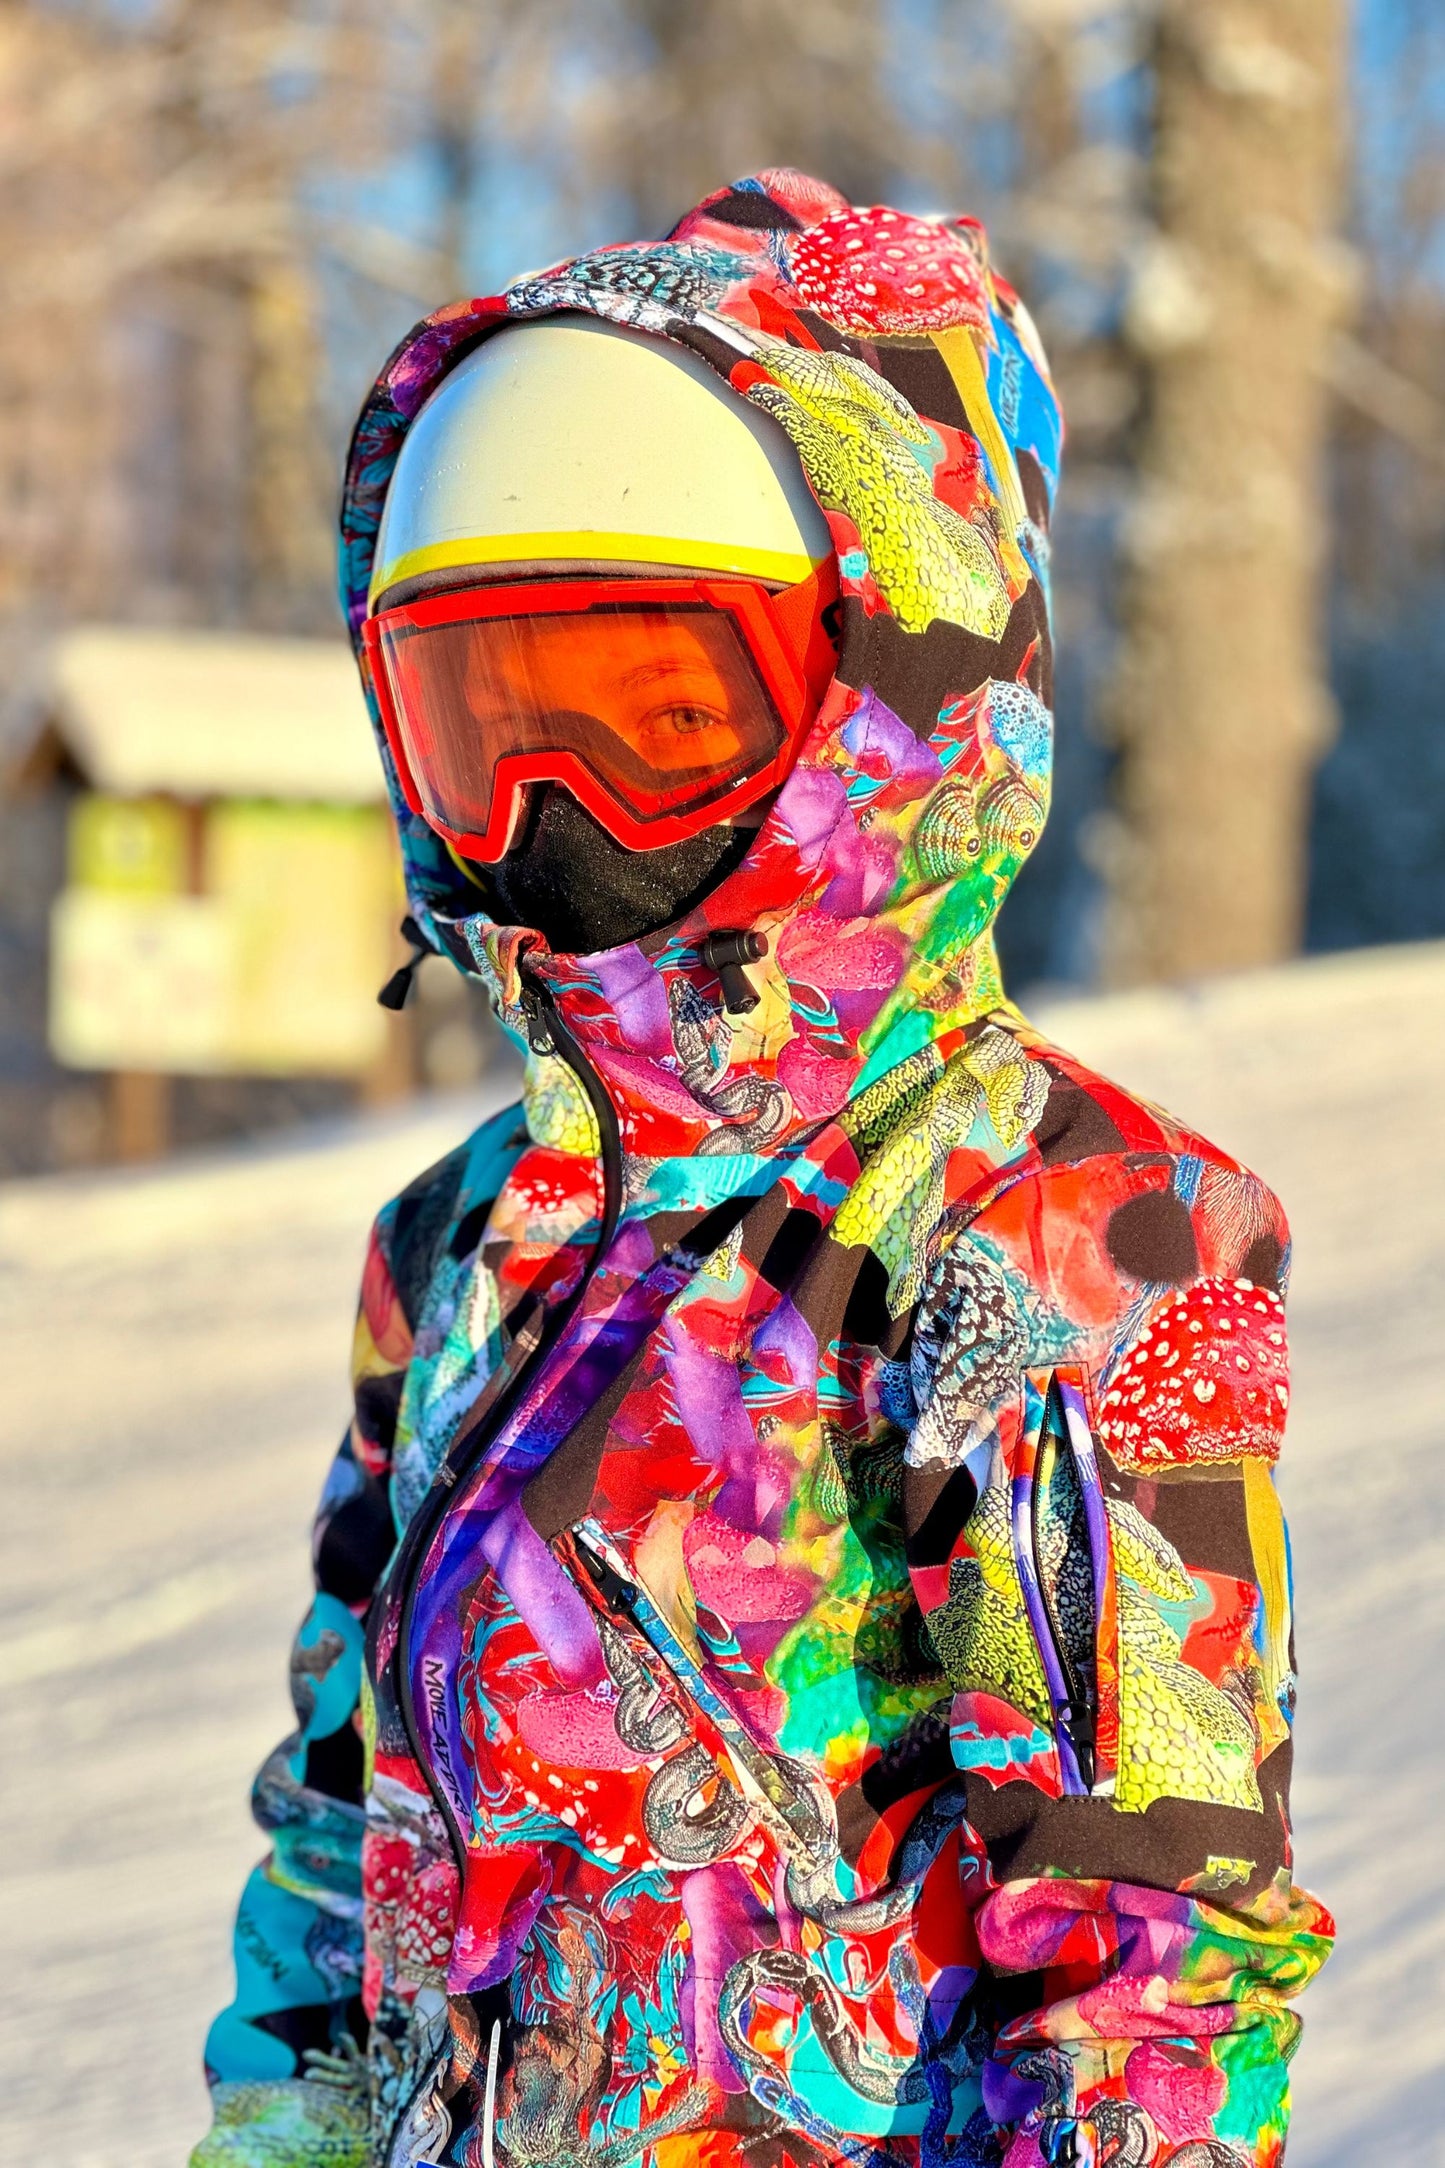 Boys/Girls winter ski / snowboard snowsuit with crazy colors